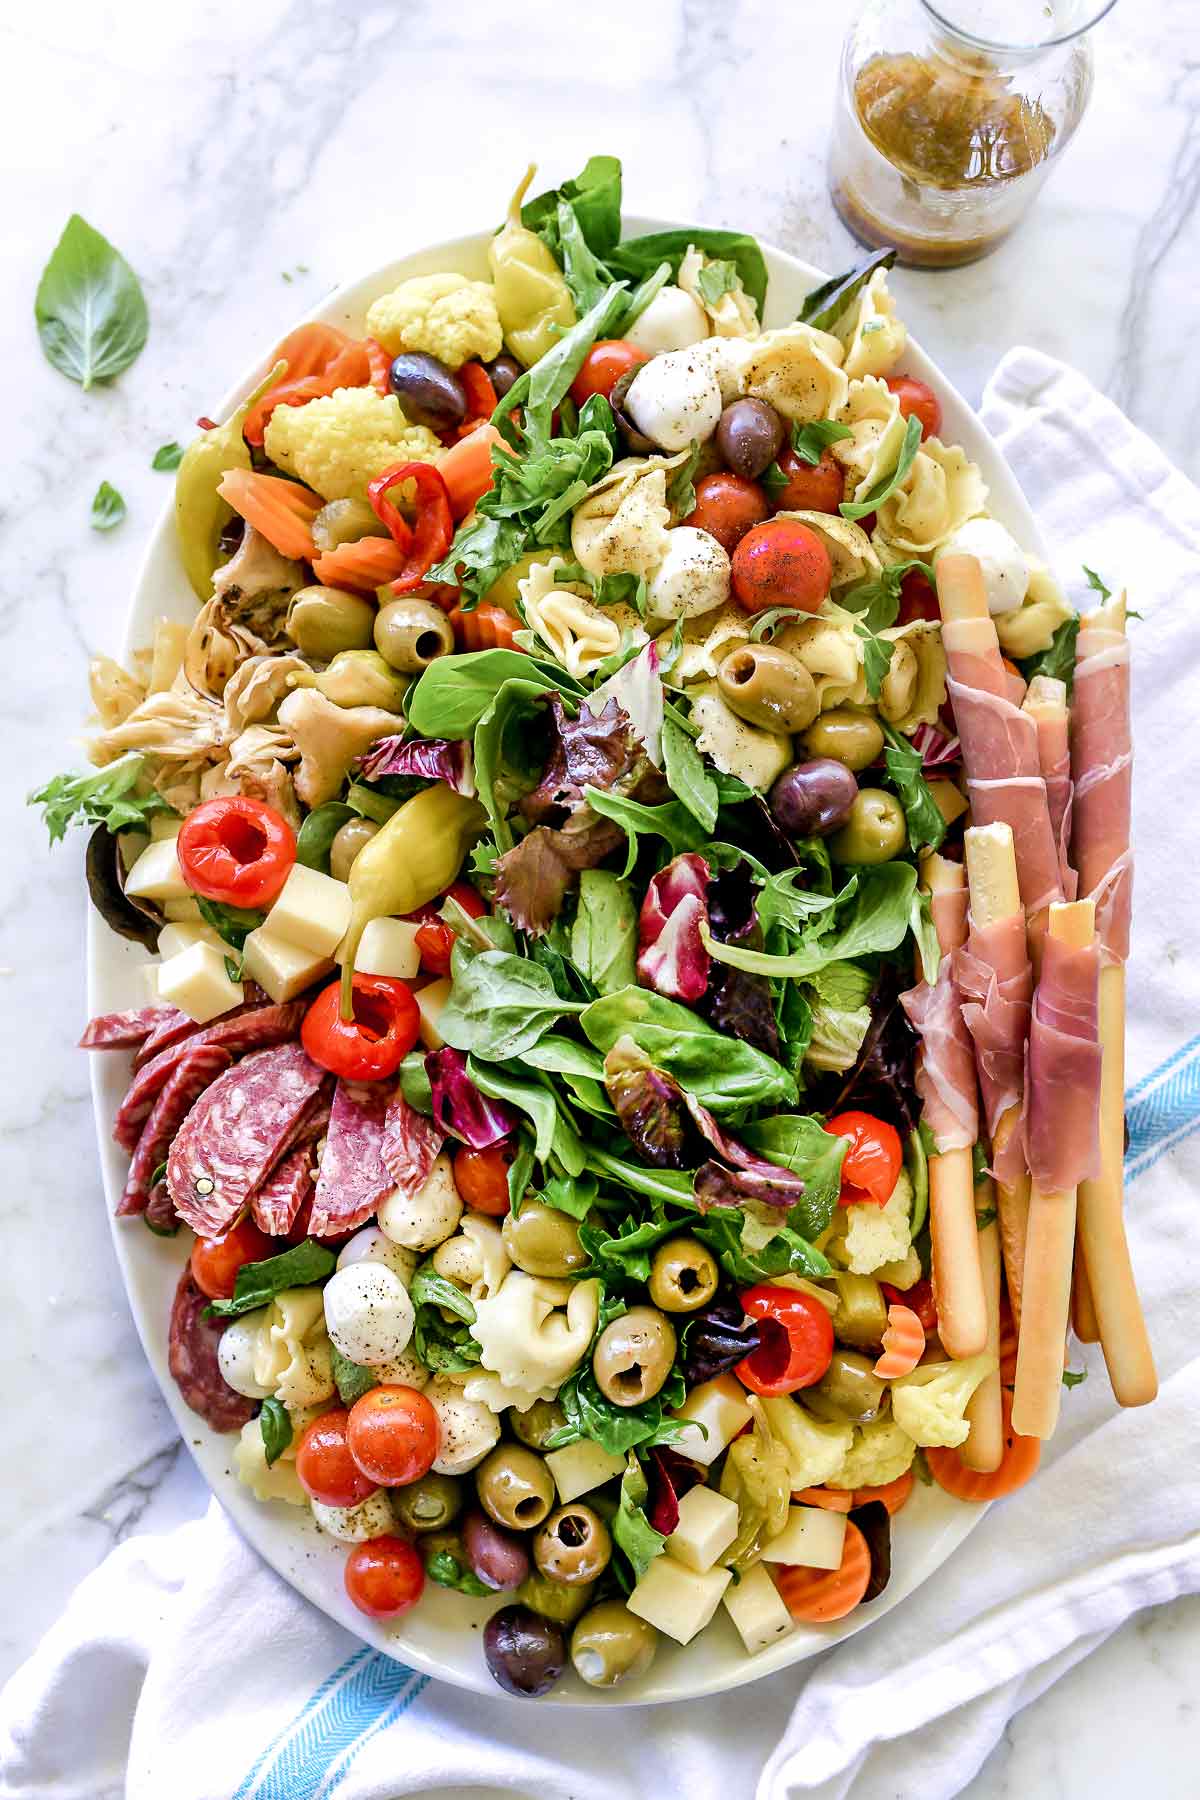 How to Make an Salad Awesome Platter Antipasto